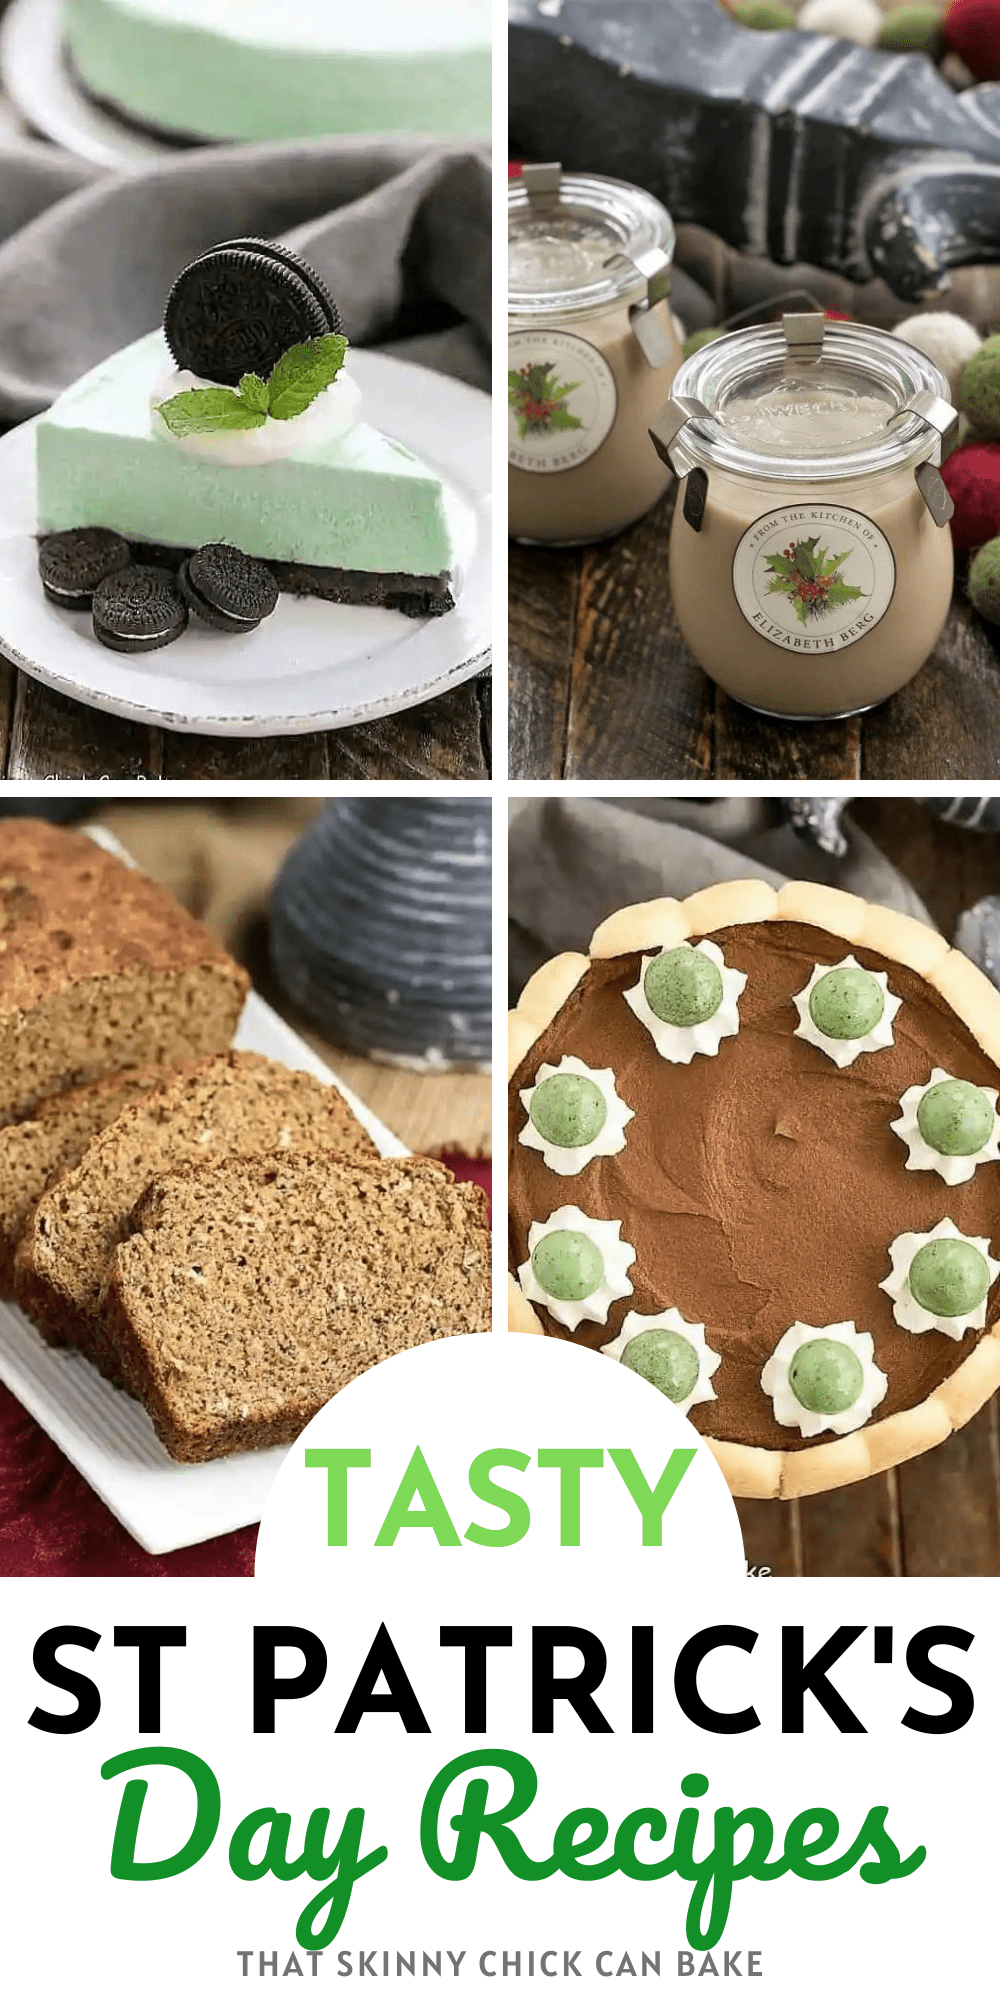 St Patrick's Day Recipes collage with 4 photos above a title text box.